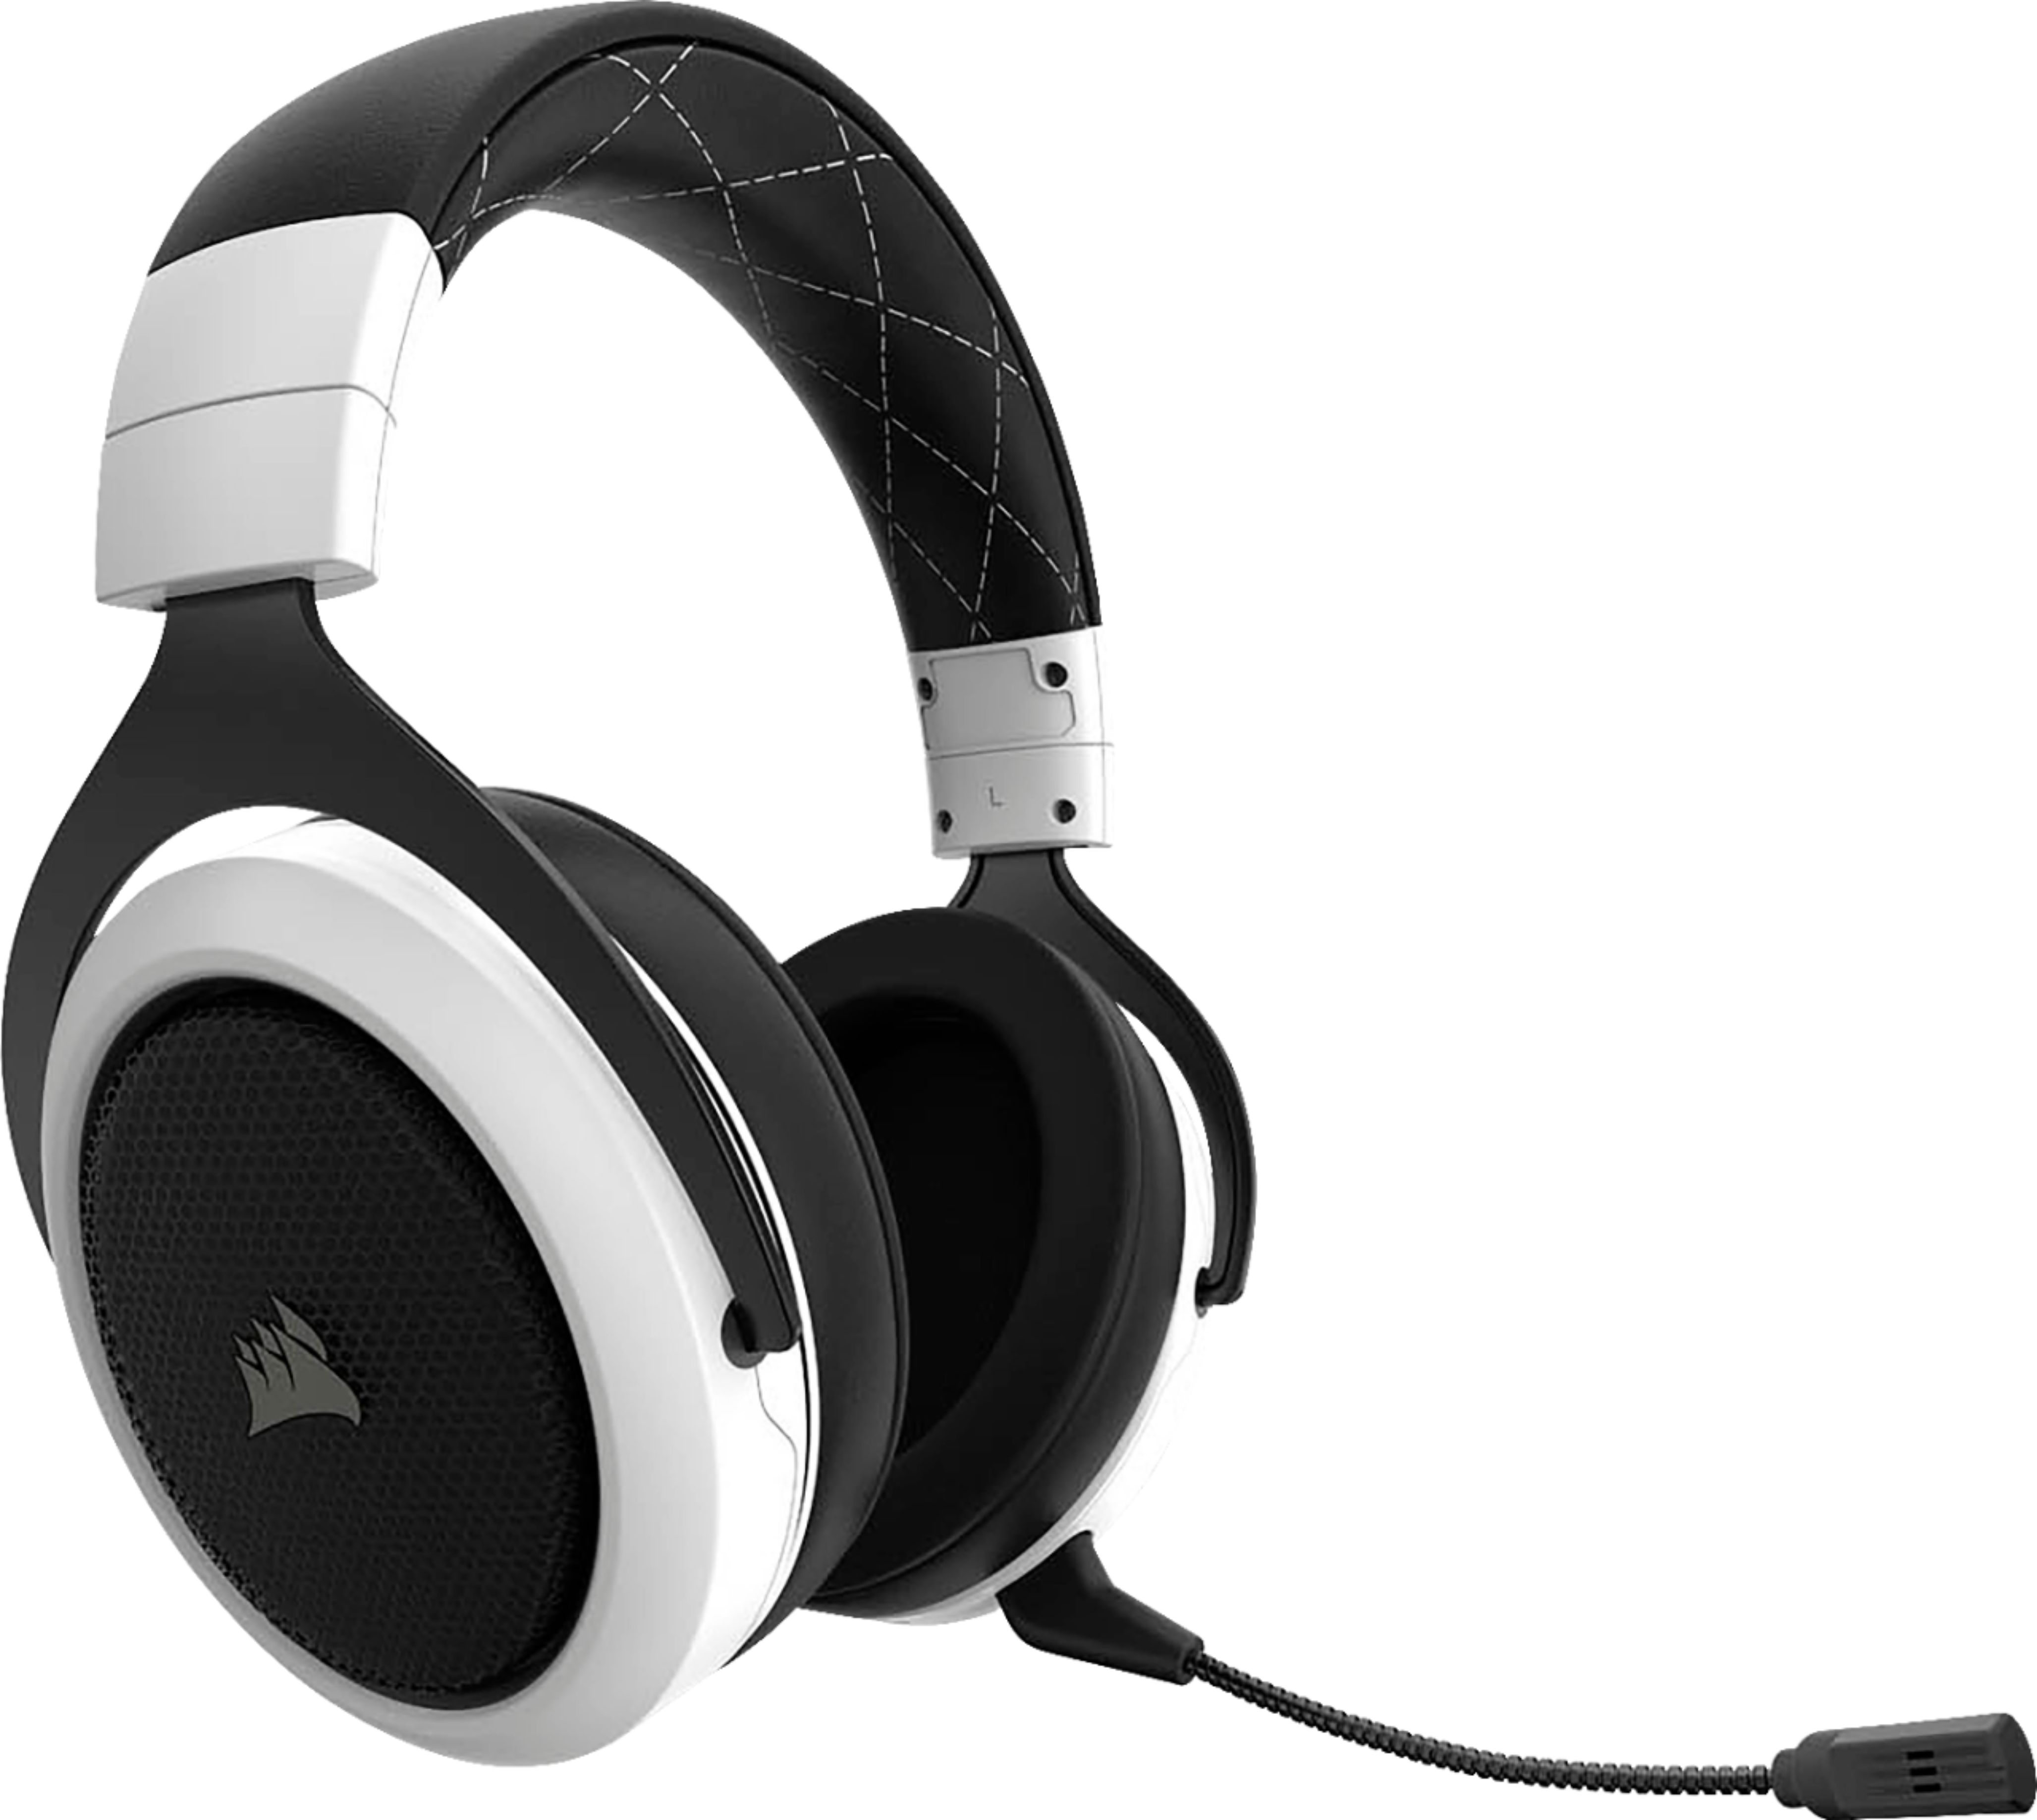 Derfra vælge Cataract Best Buy: CORSAIR HS70 Wireless 7.1 Surround Sound Gaming Headset for PC  and PlayStation 4 White CA-9011177-NA